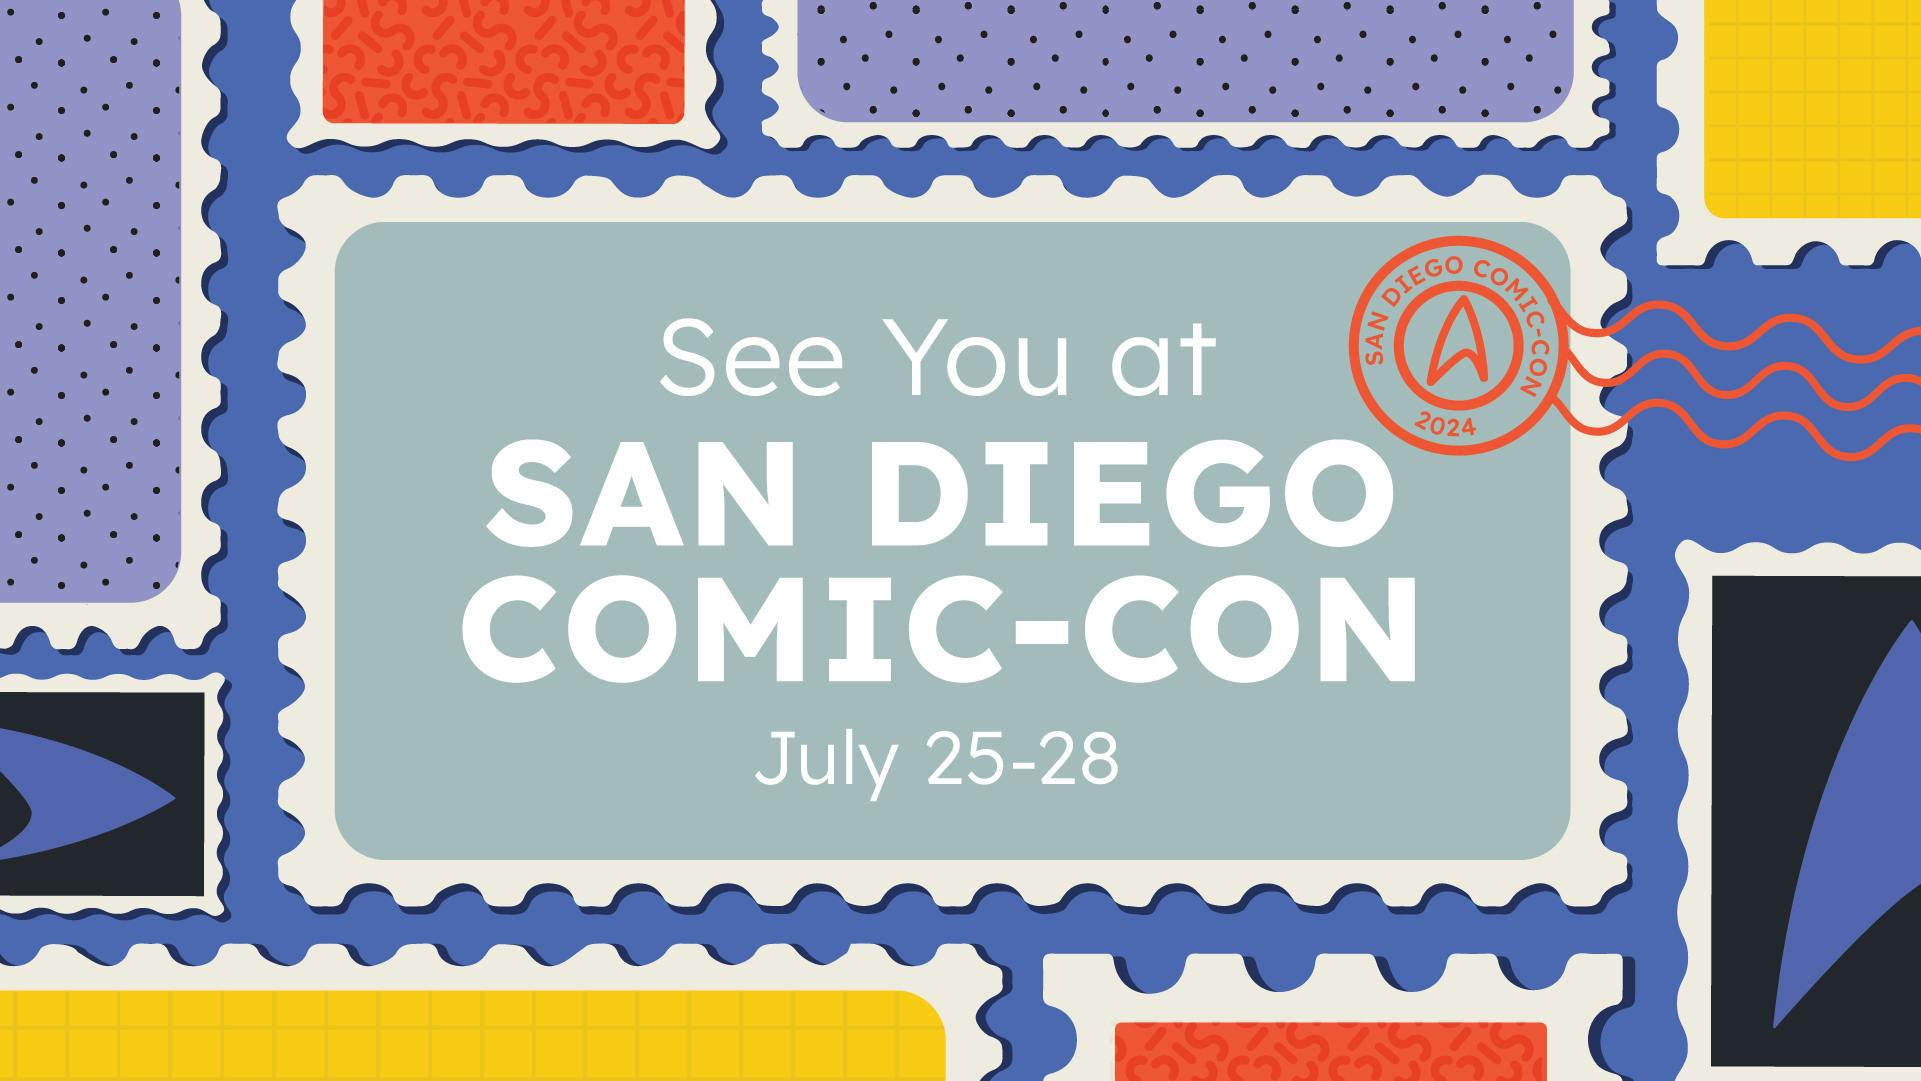 series of colorful stamp illustrations with a larger postcard-style stamp with 'See You at San Diego Comic-Con, July 25-28' in the middle 